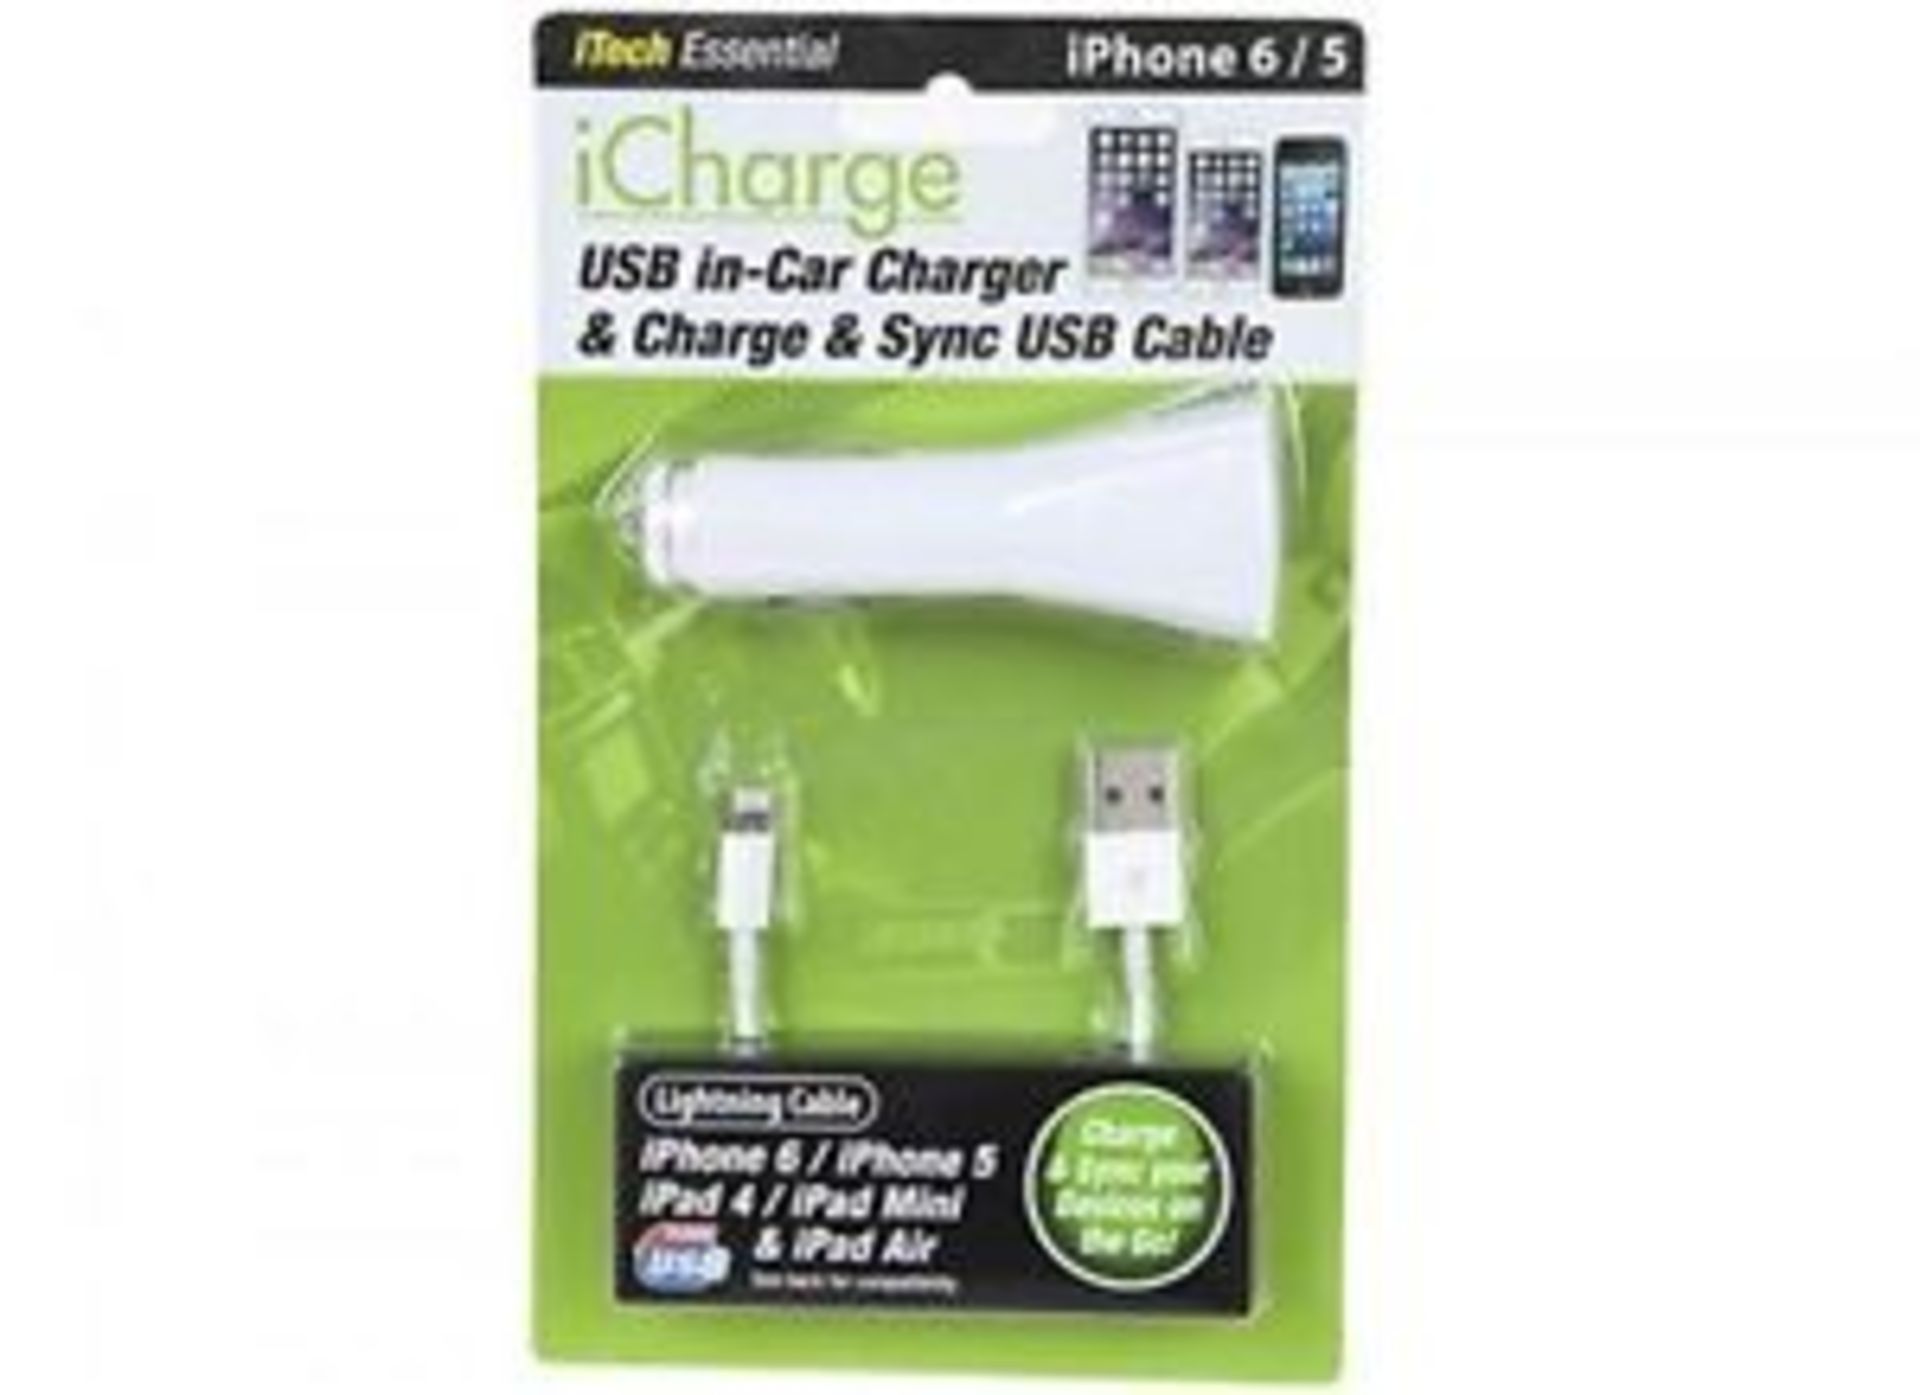 V *TRADE QTY* Brand New JuiceBANK USB In car charger with lightening cable for iphone 5 and 6 X 24